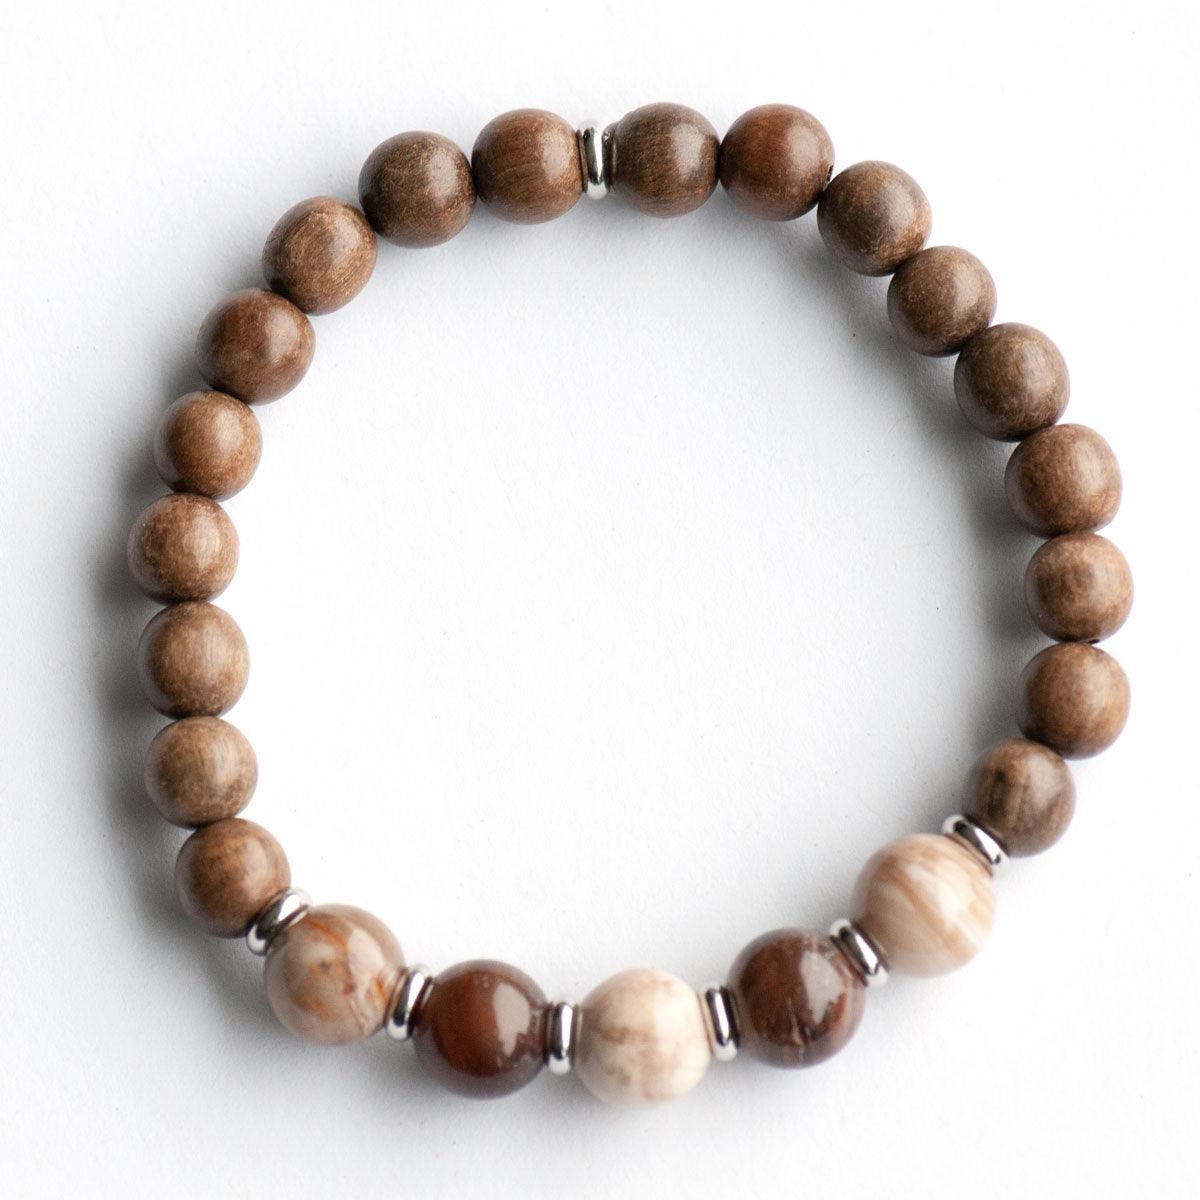 Handmade unisex bracelet with petrified wood and wooden beads